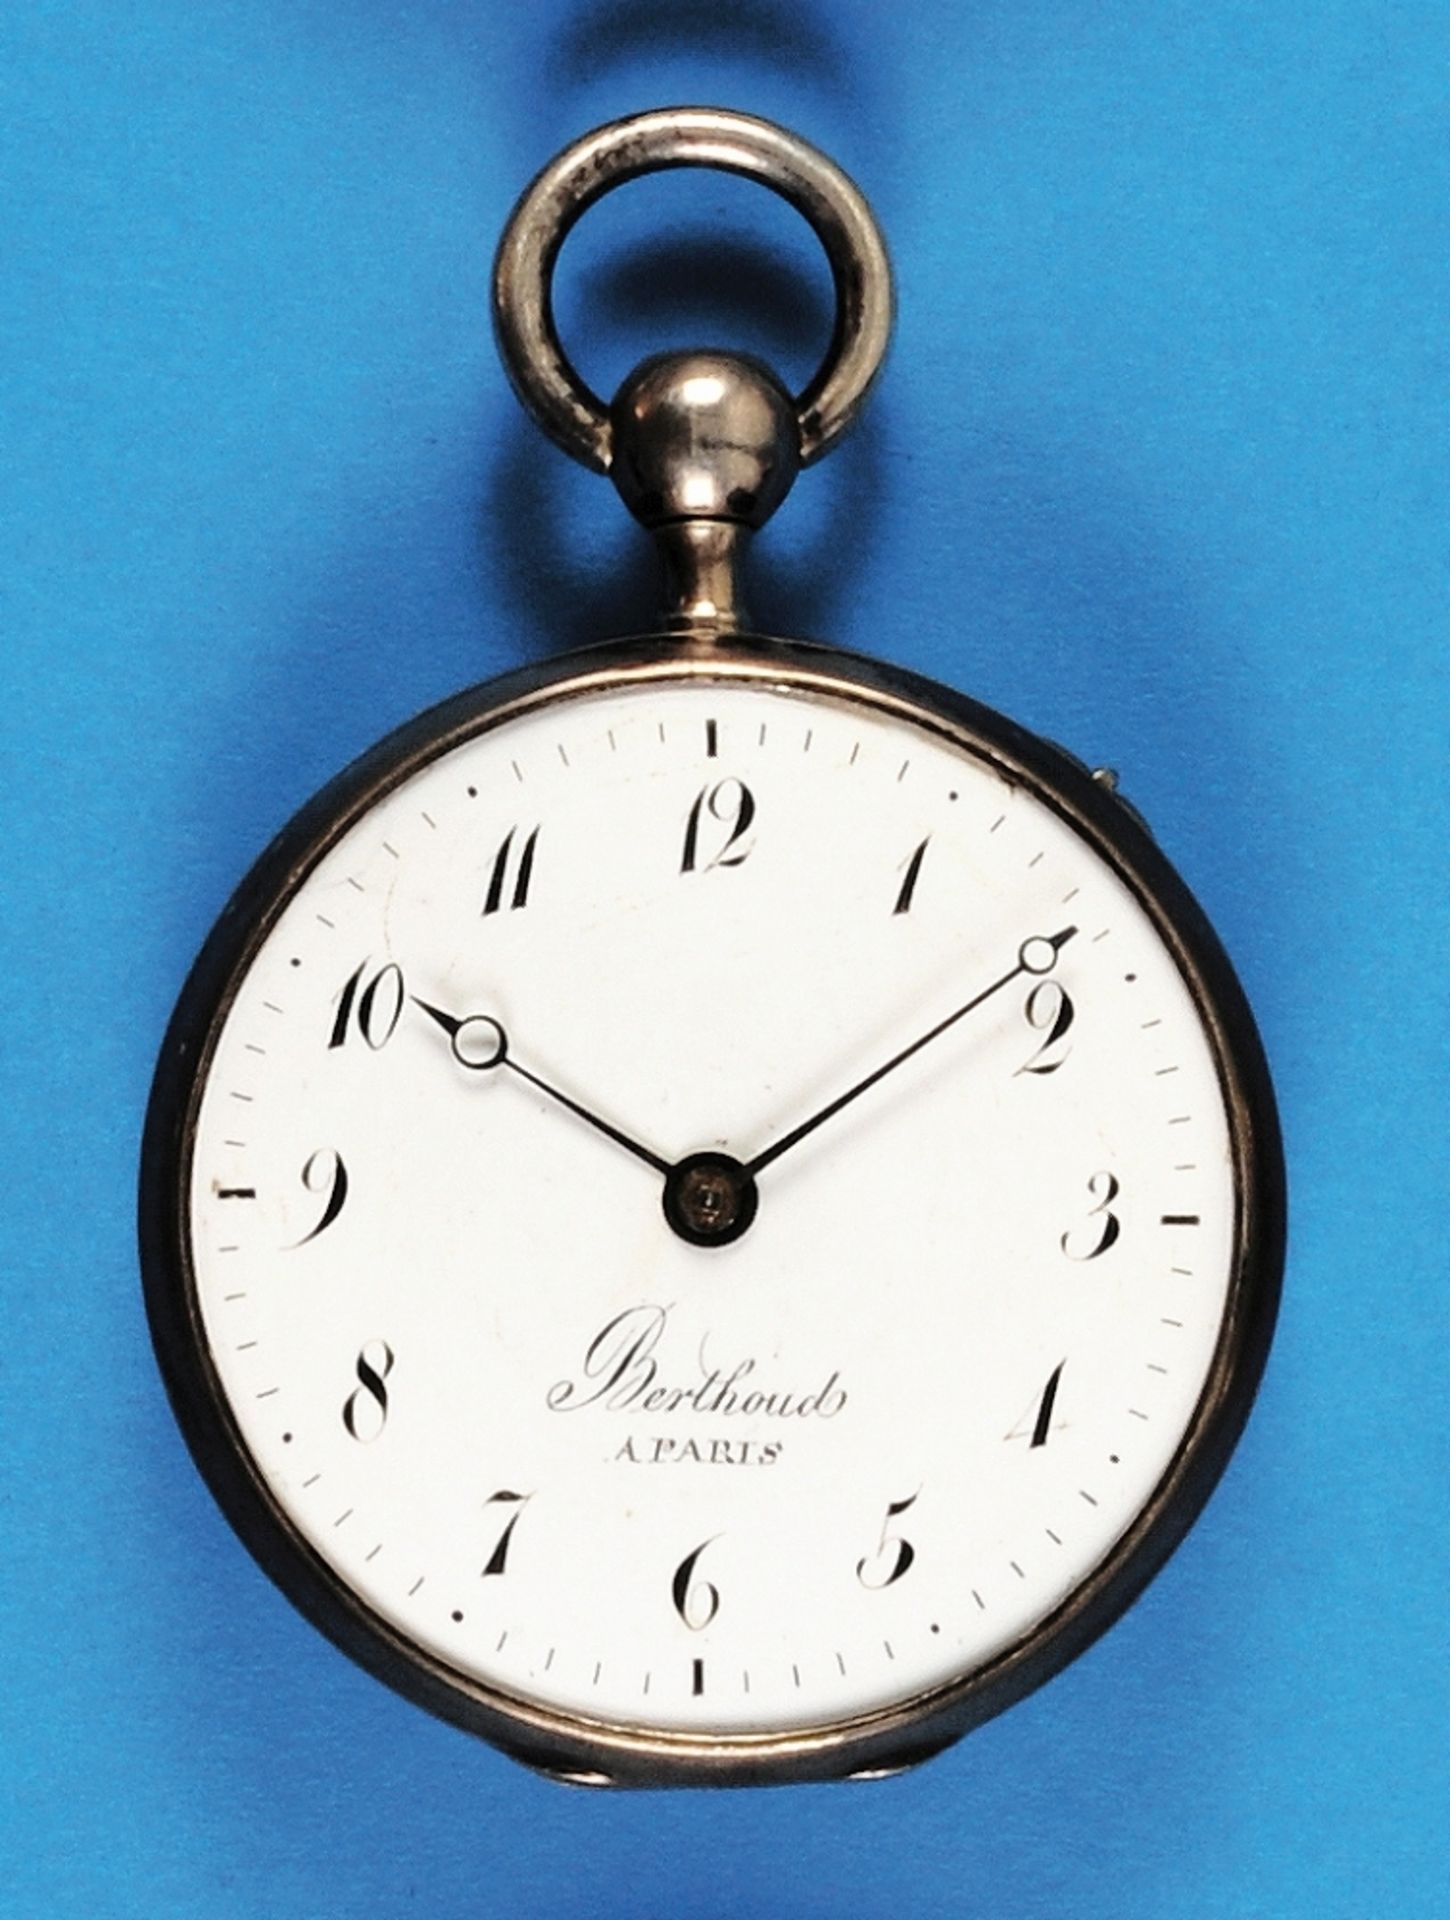 Big silver spindle pocket watch with 1/4-repetition, on dial and cuvette sign. Berthoud à Paris